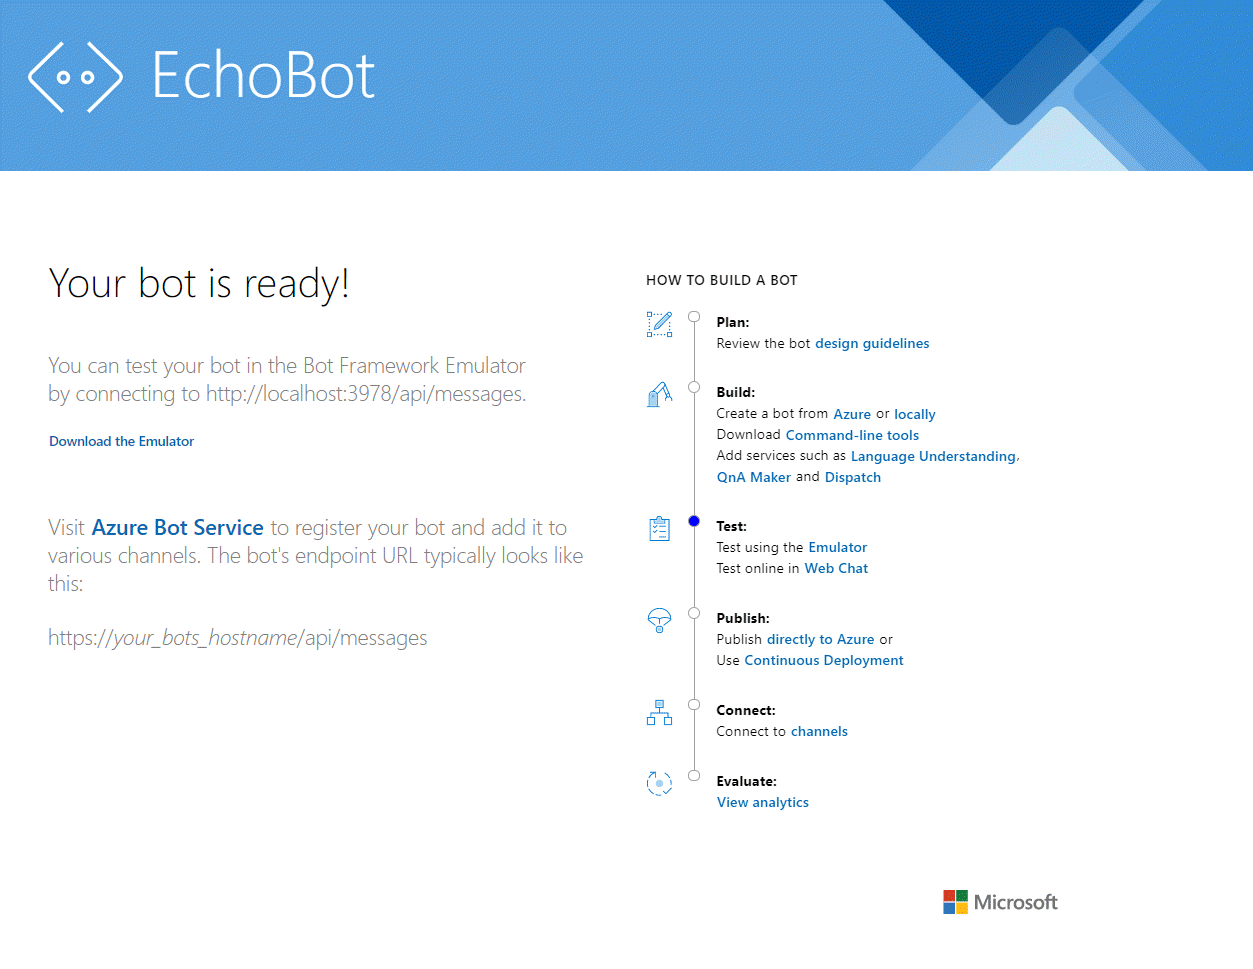 Screenshot that shows the EchoBot page with the message that your bot is ready.